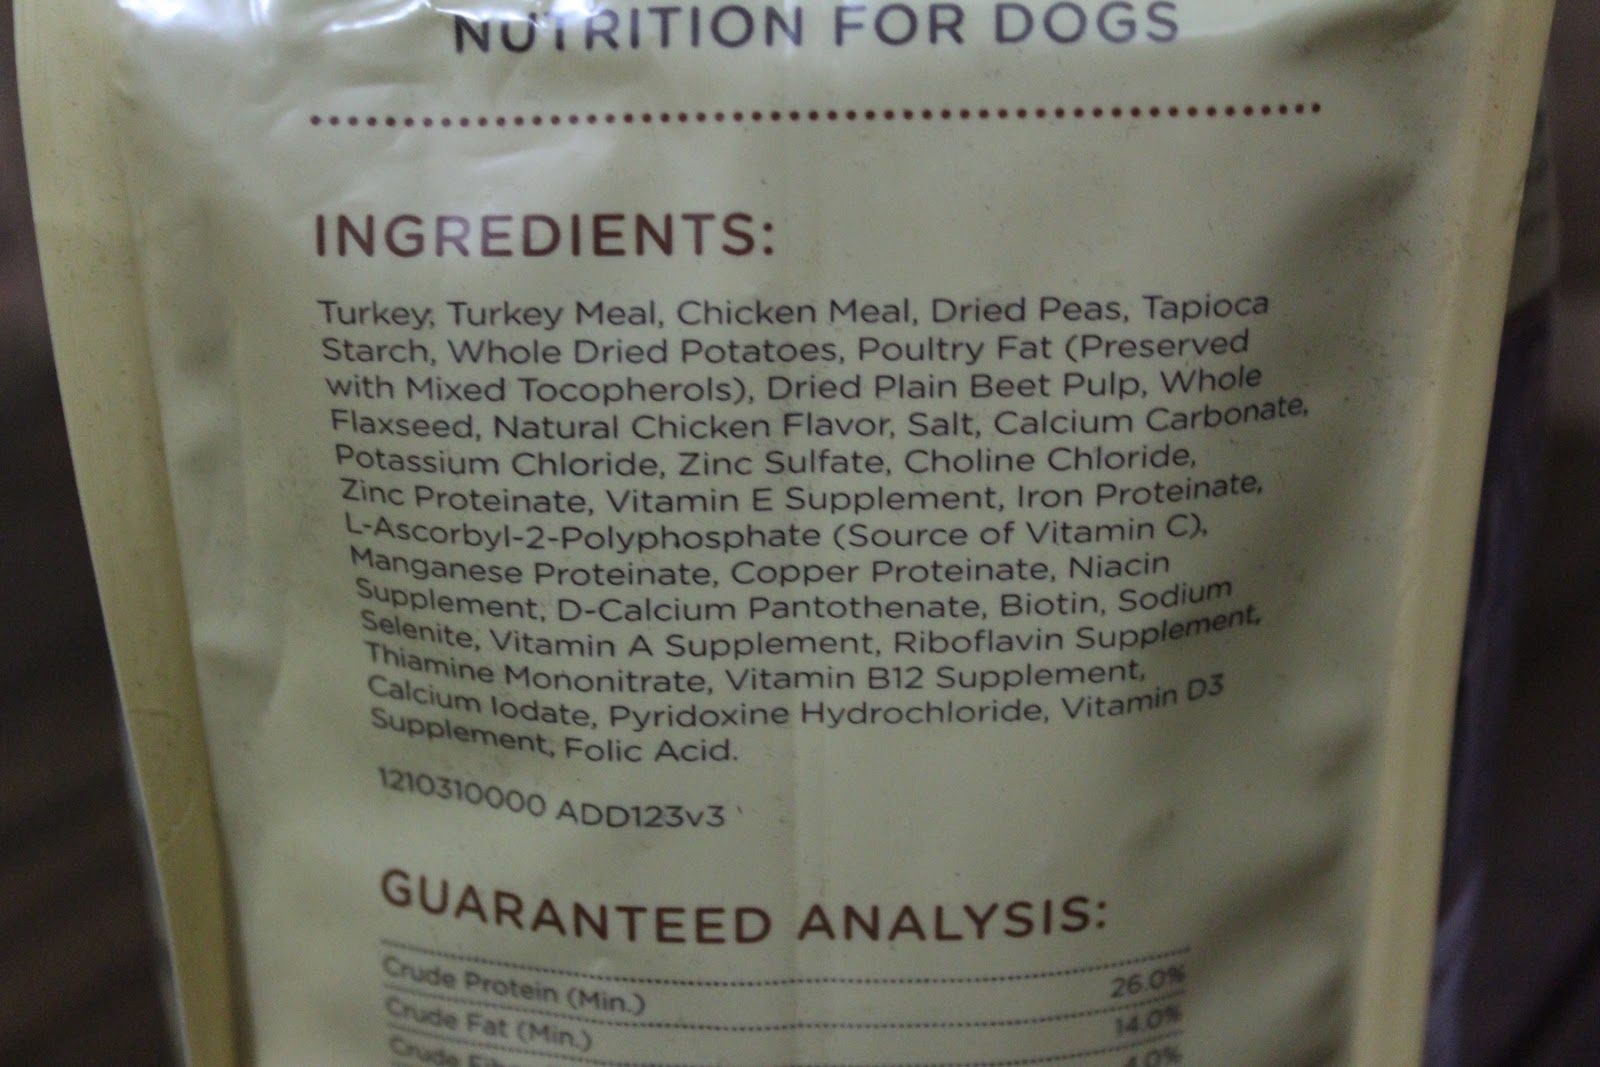 What are the benefits of grain-free dog food?